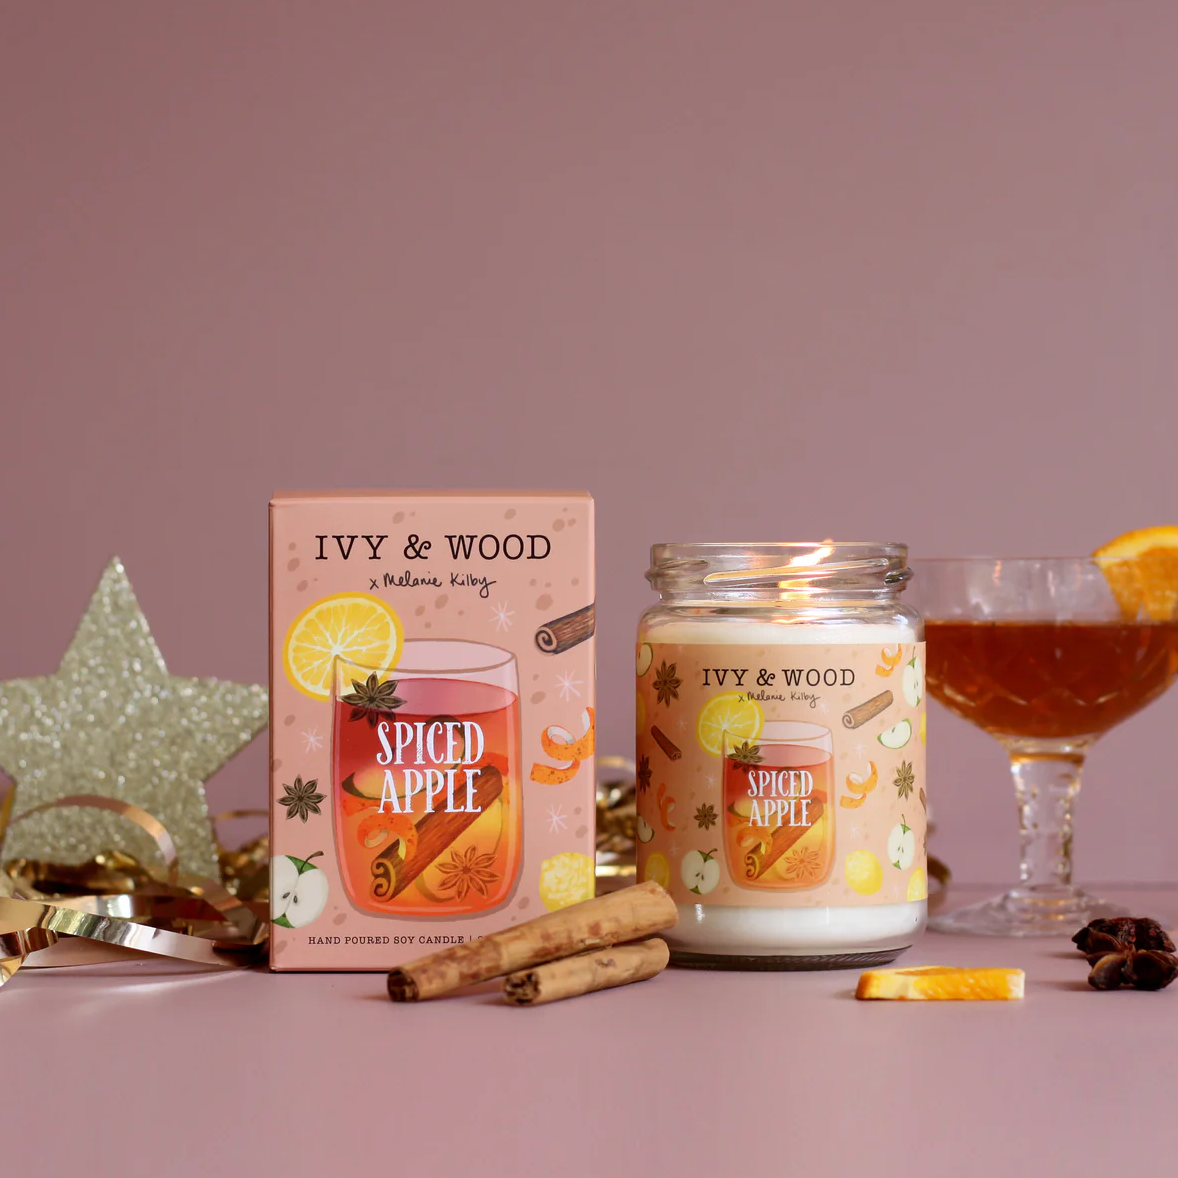 Ivy & Wood: Limited Edition Spiced Apple Christmas Candle